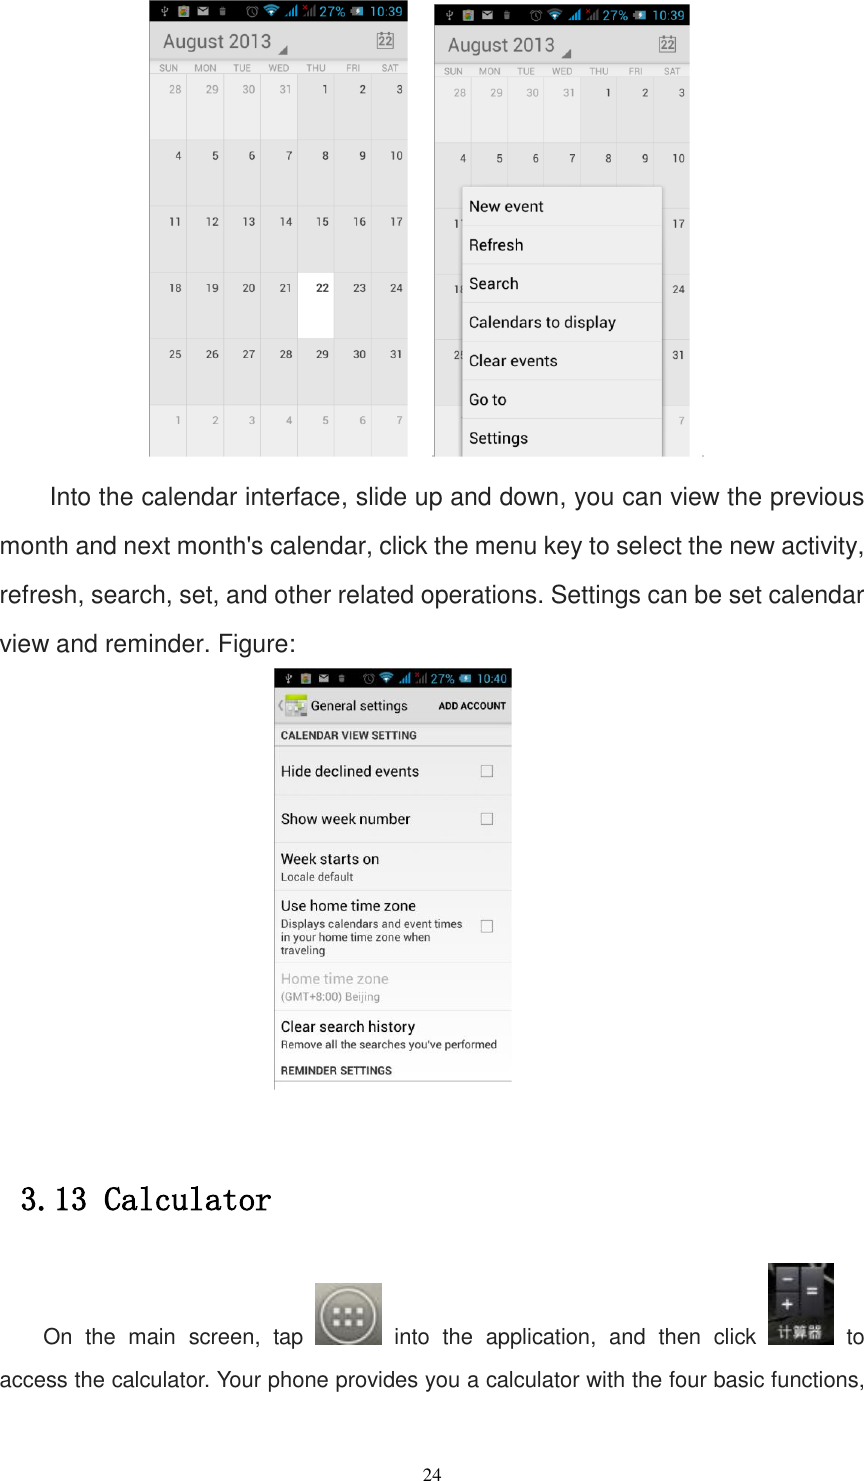   24      Into the calendar interface, slide up and down, you can view the previous month and next month&apos;s calendar, click the menu key to select the new activity, refresh, search, set, and other related operations. Settings can be set calendar view and reminder. Figure:   3.13 Calculator On  the  main  screen,  tap    into  the  application,  and  then  click    to access the calculator. Your phone provides you a calculator with the four basic functions, 